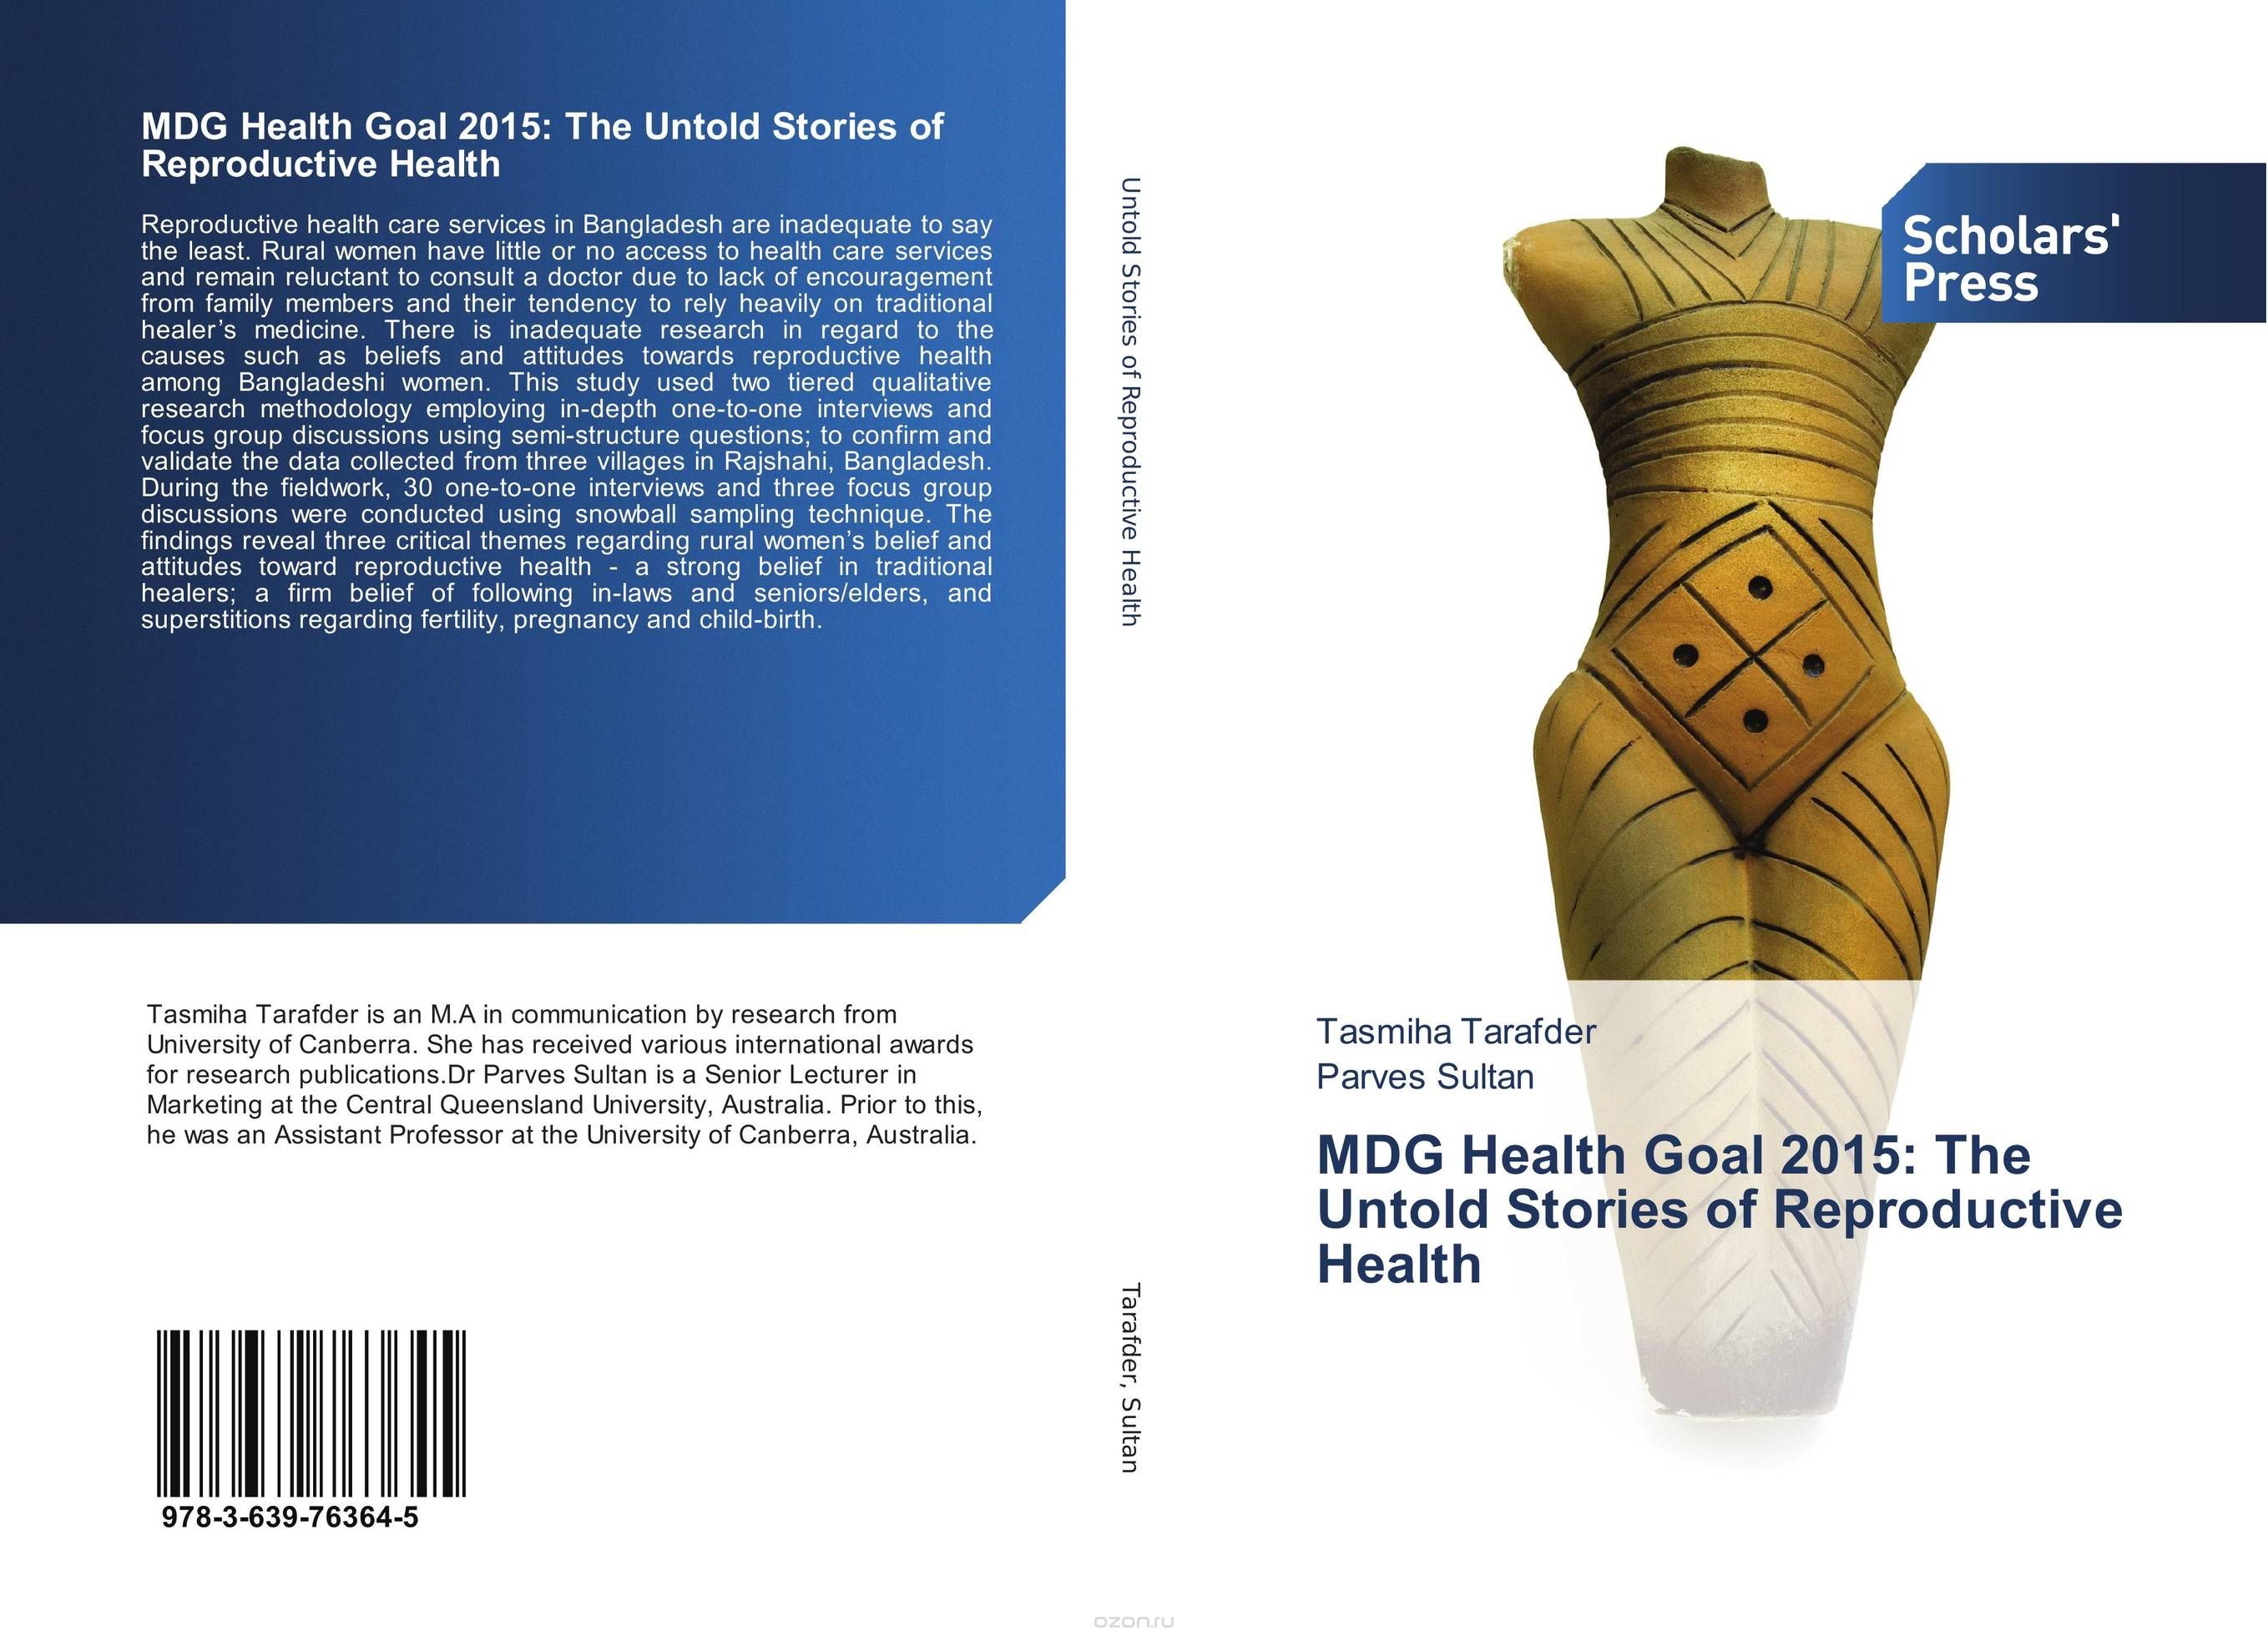 MDG Health Goal 2015: The Untold Stories of Reproductive Health